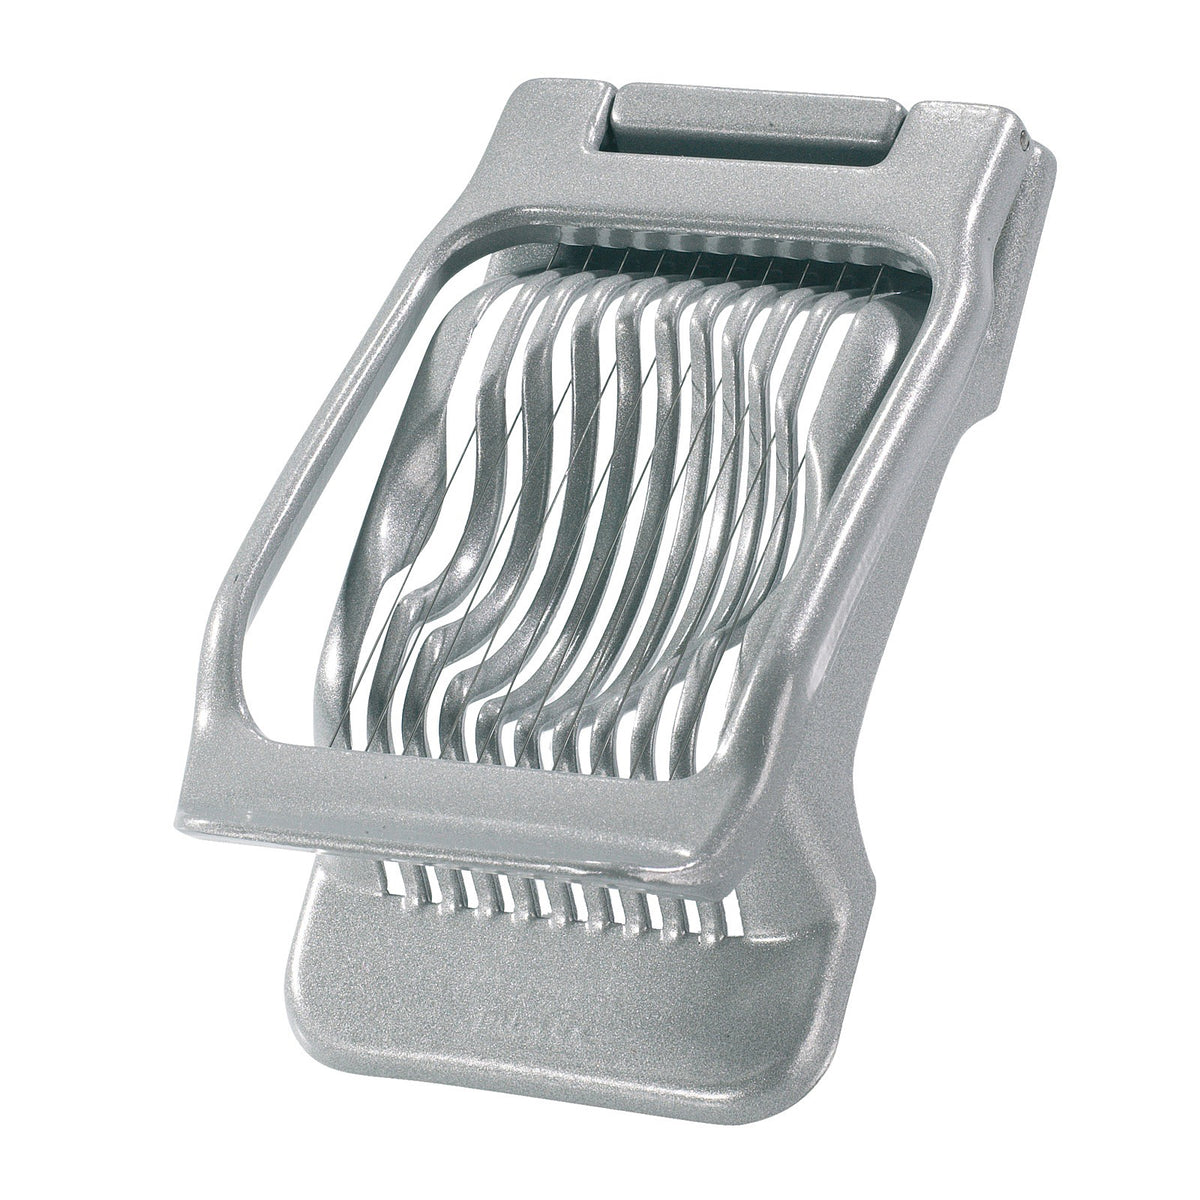 Westmark Heavy Duty Cheese Slicer & Reviews